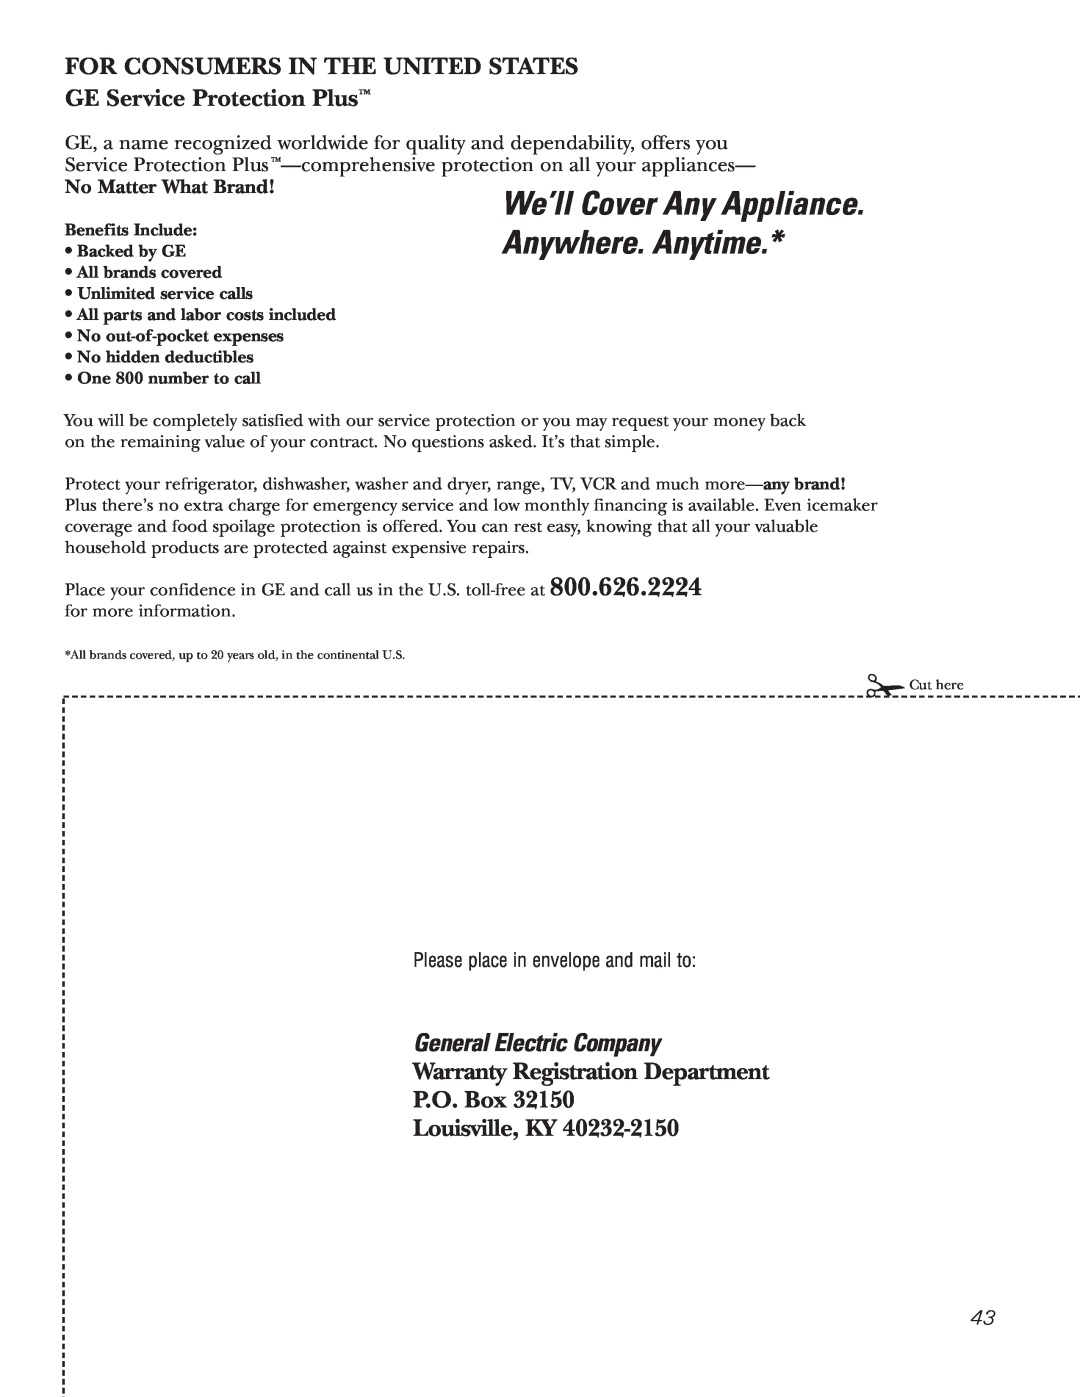 GE PGS968 For Consumers In The United States, GE Service Protection Plus, General Electric Company, Louisville, KY 